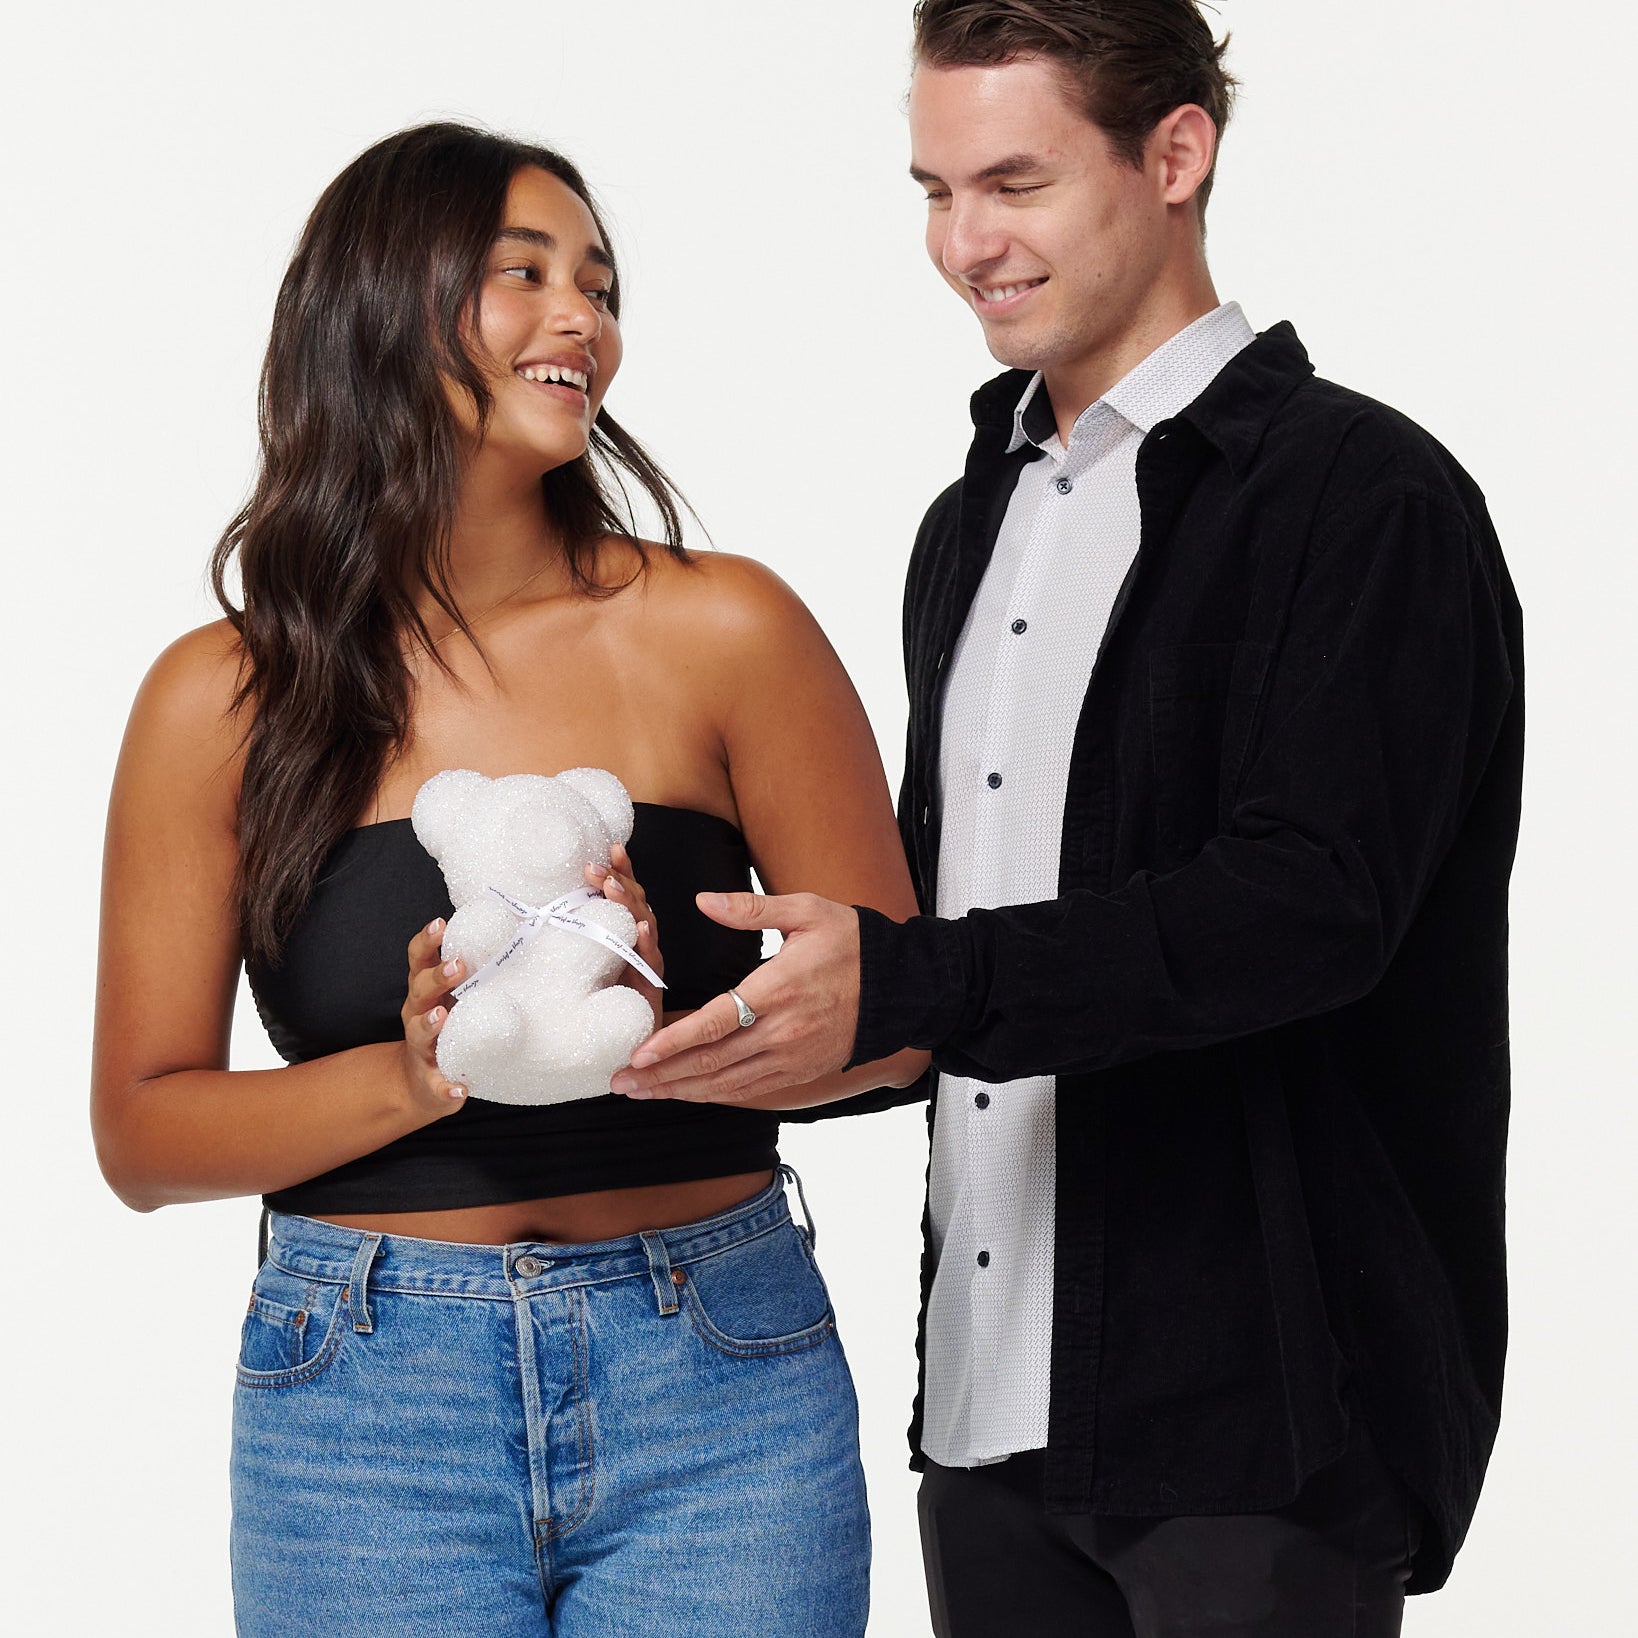 A woman in a black top and blue jeans smiles as she holds a white glitter bear with a white ribbon, while a man in a black jacket and white shirt looks on fondly.